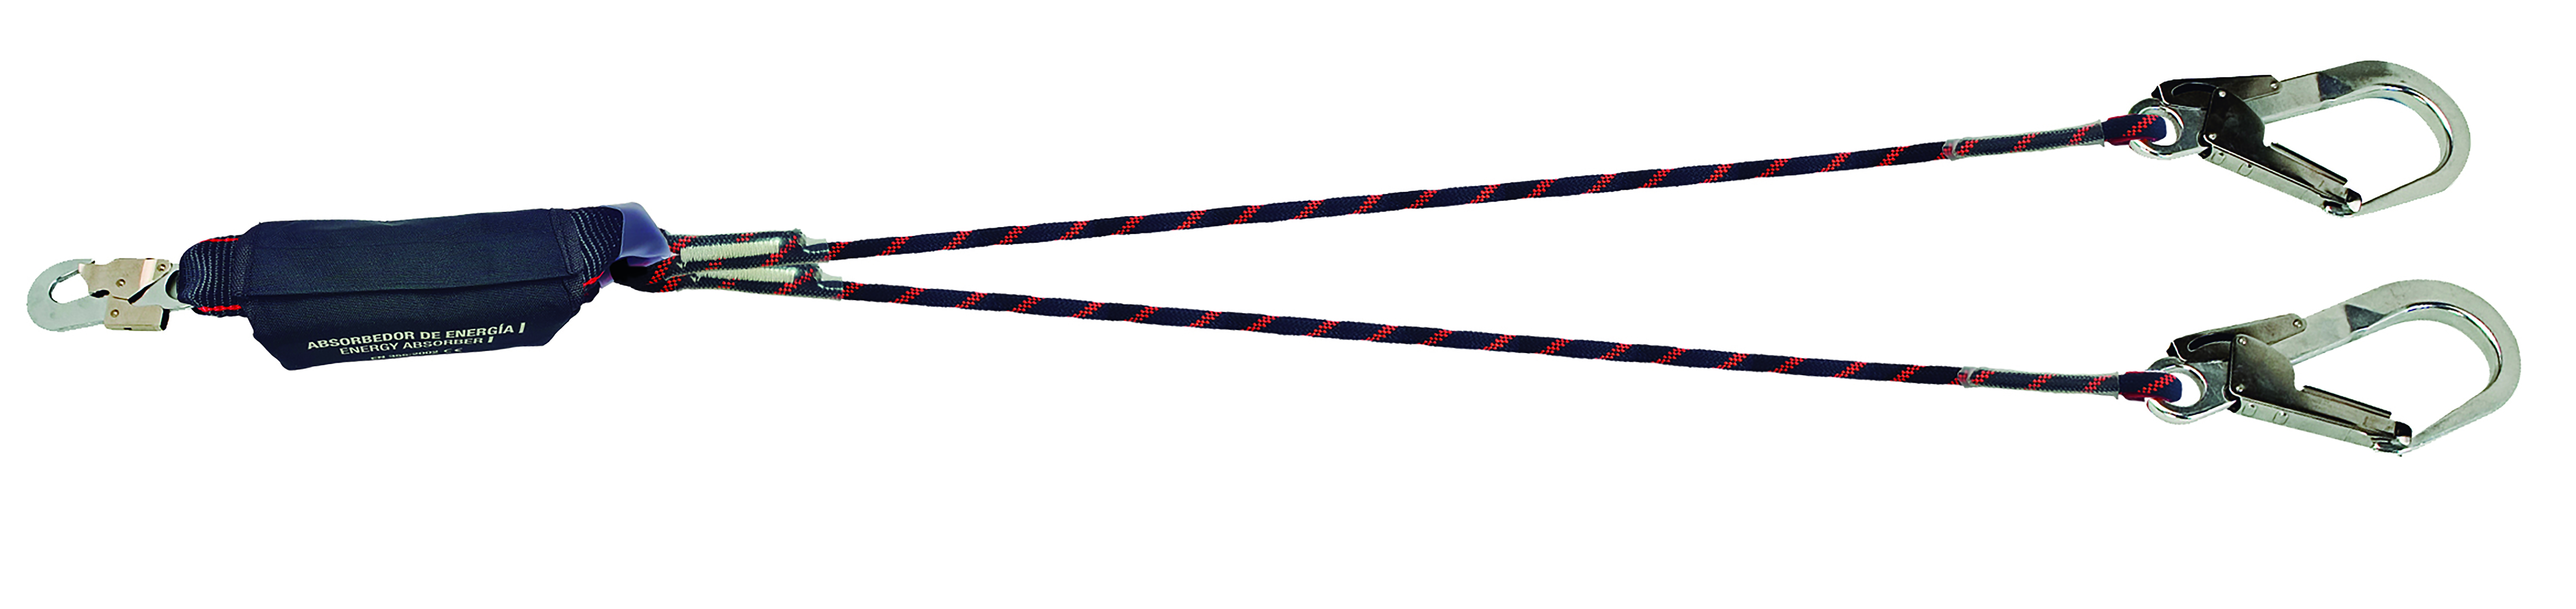 Y lanyard with energy absorbers